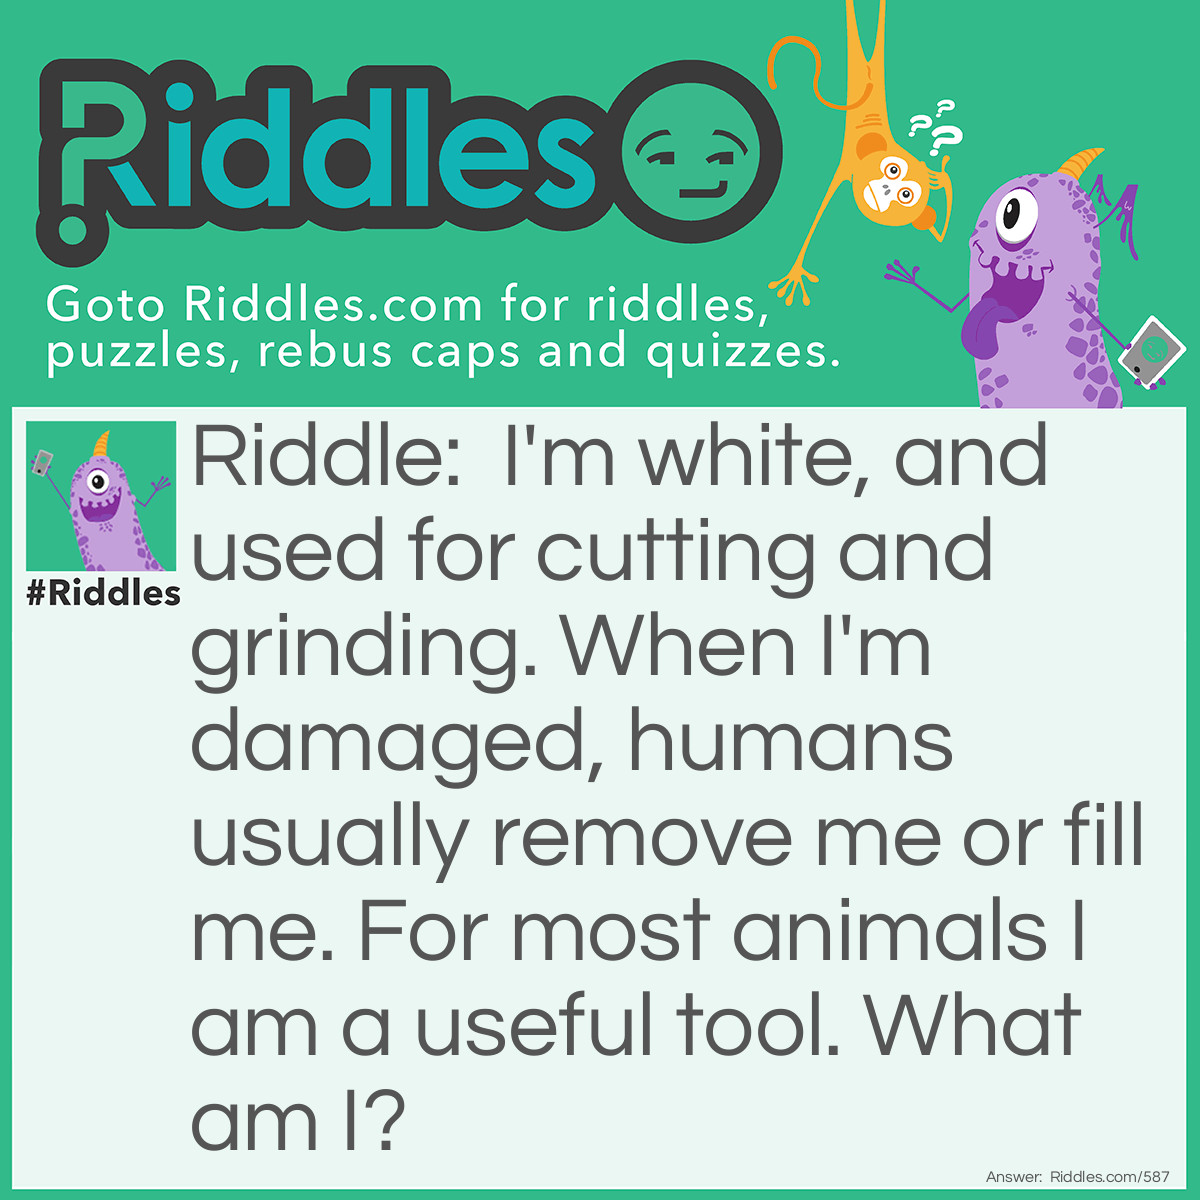 Riddle: I'm white, and used for cutting and grinding. When I'm damaged, humans usually remove me or fill me. For most animals I am a useful tool.
What am I? Answer: A tooth!